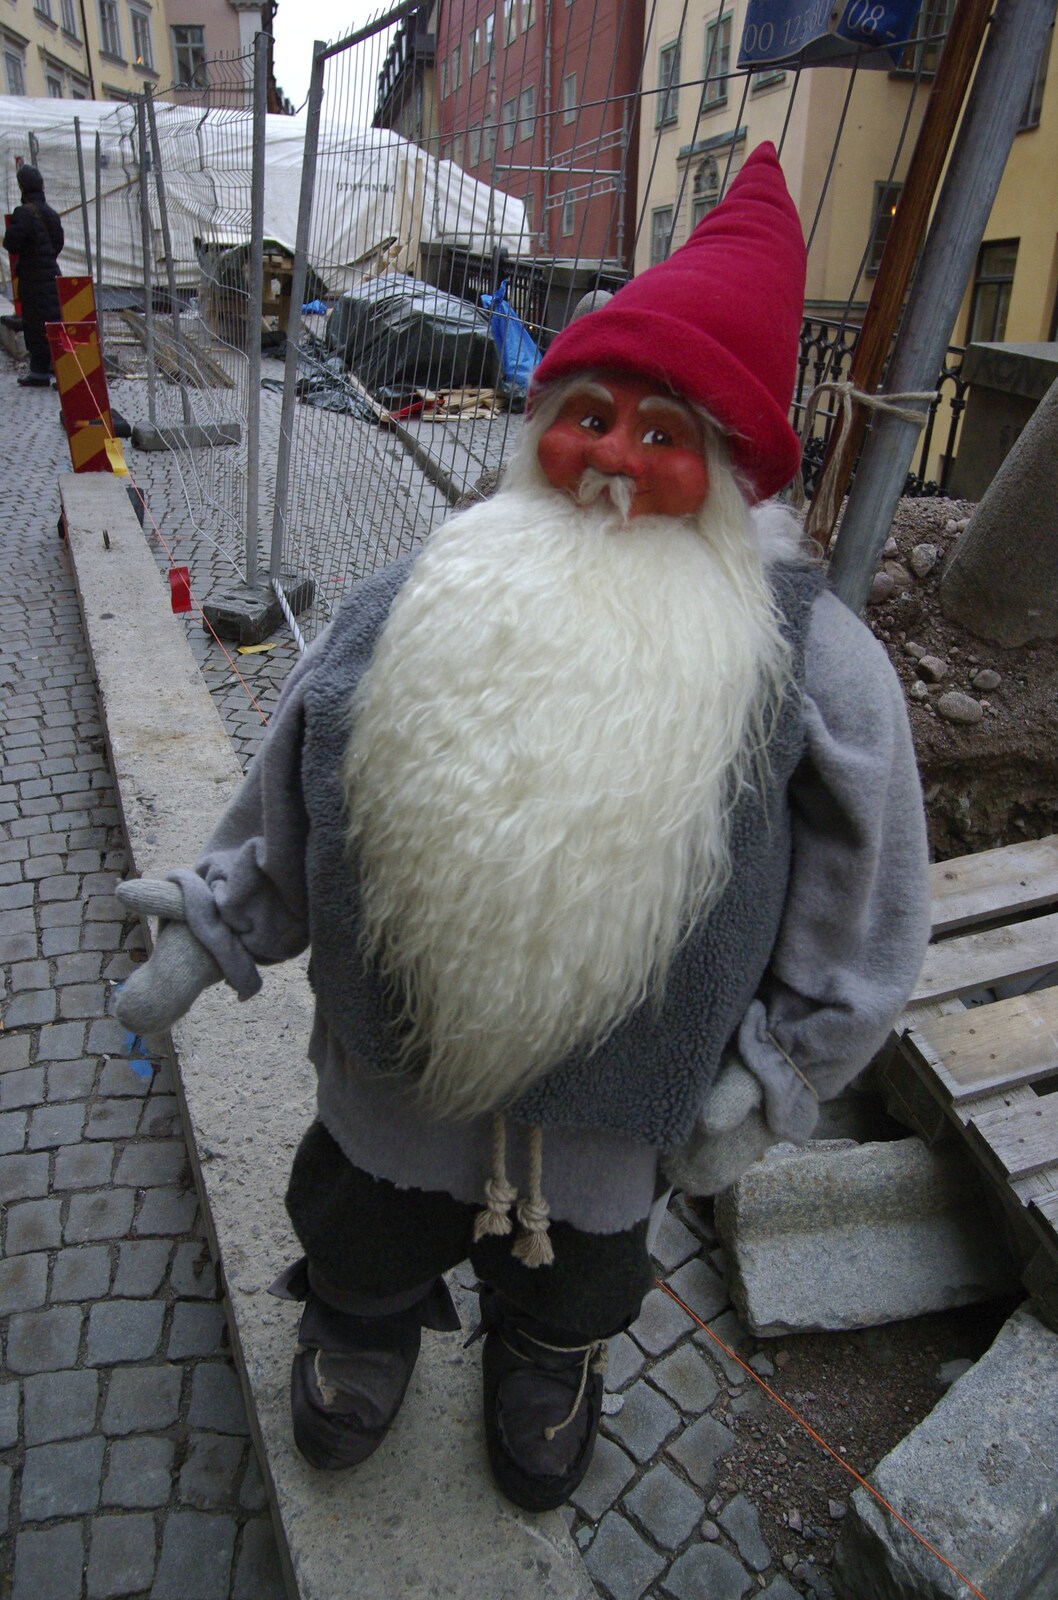 A random Christmas gnome from Gamla Stan, Stockholm, Sweden - 15th December 2007